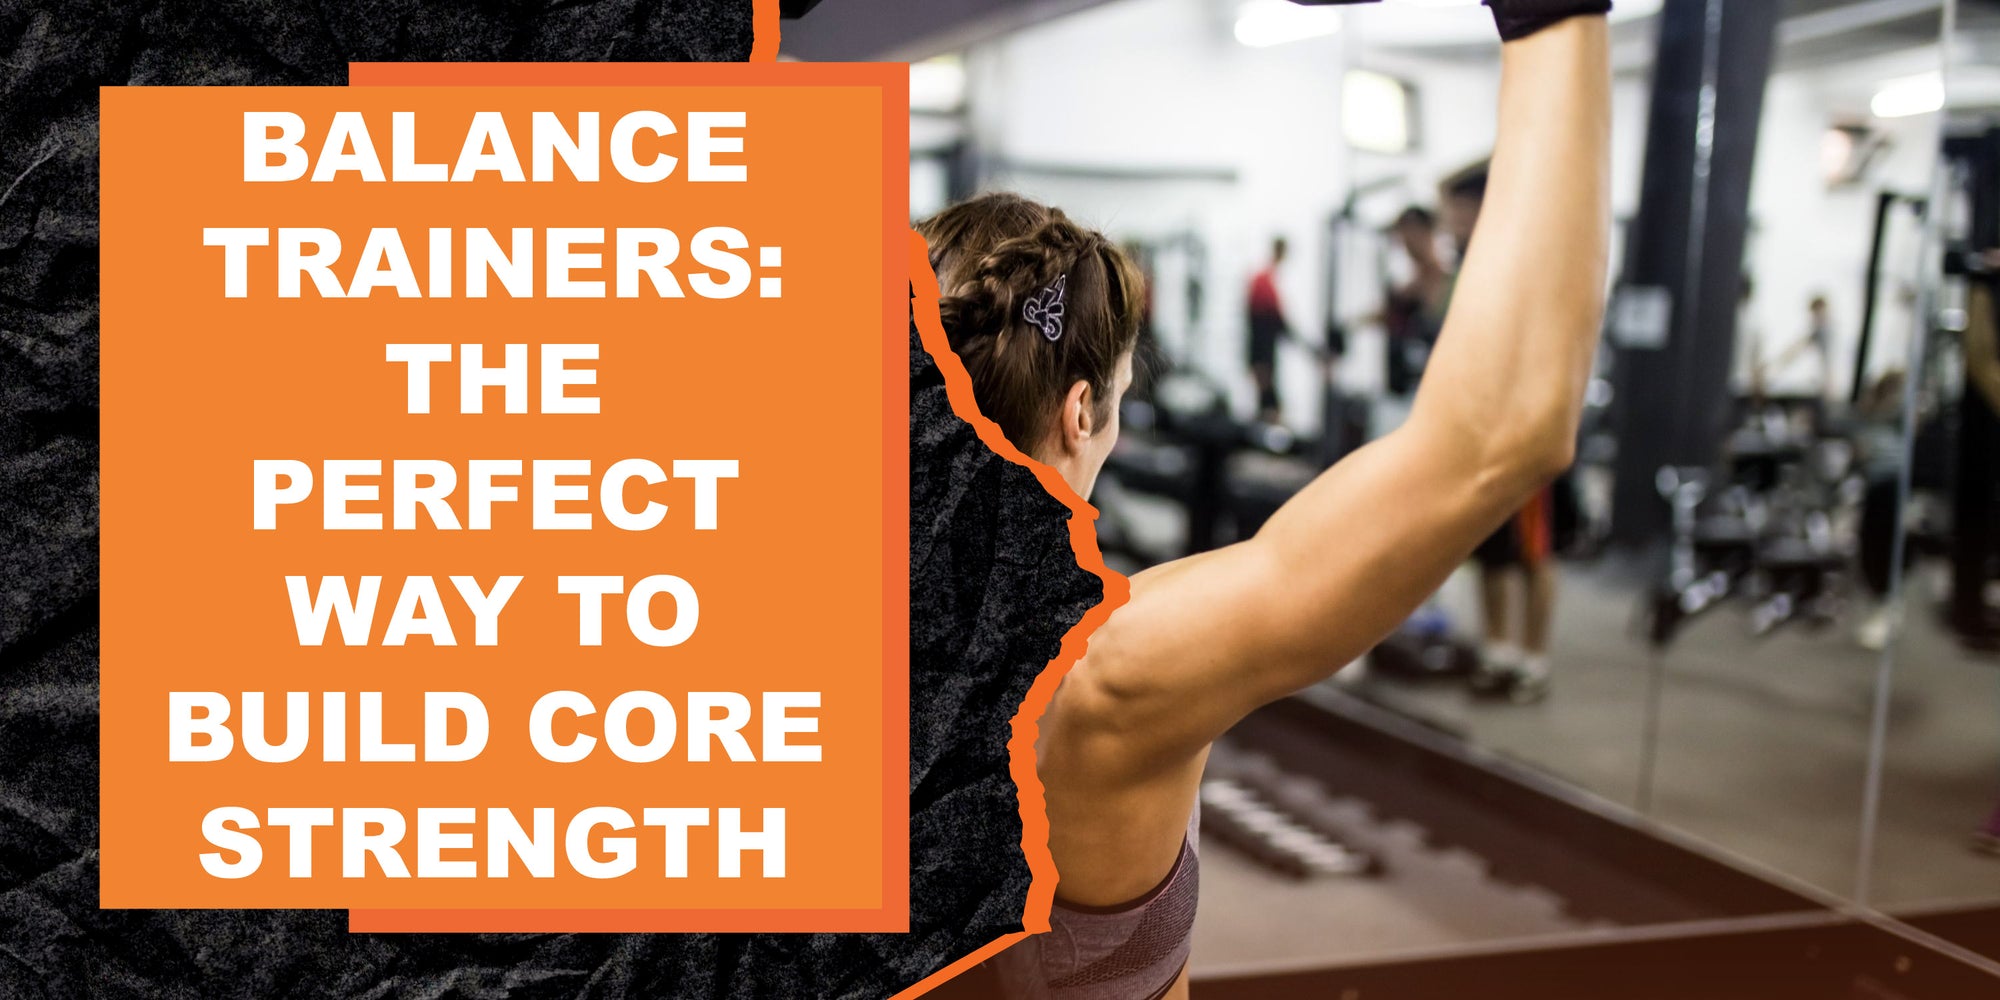 Balance Trainers: The Perfect Way To Build Core Strength